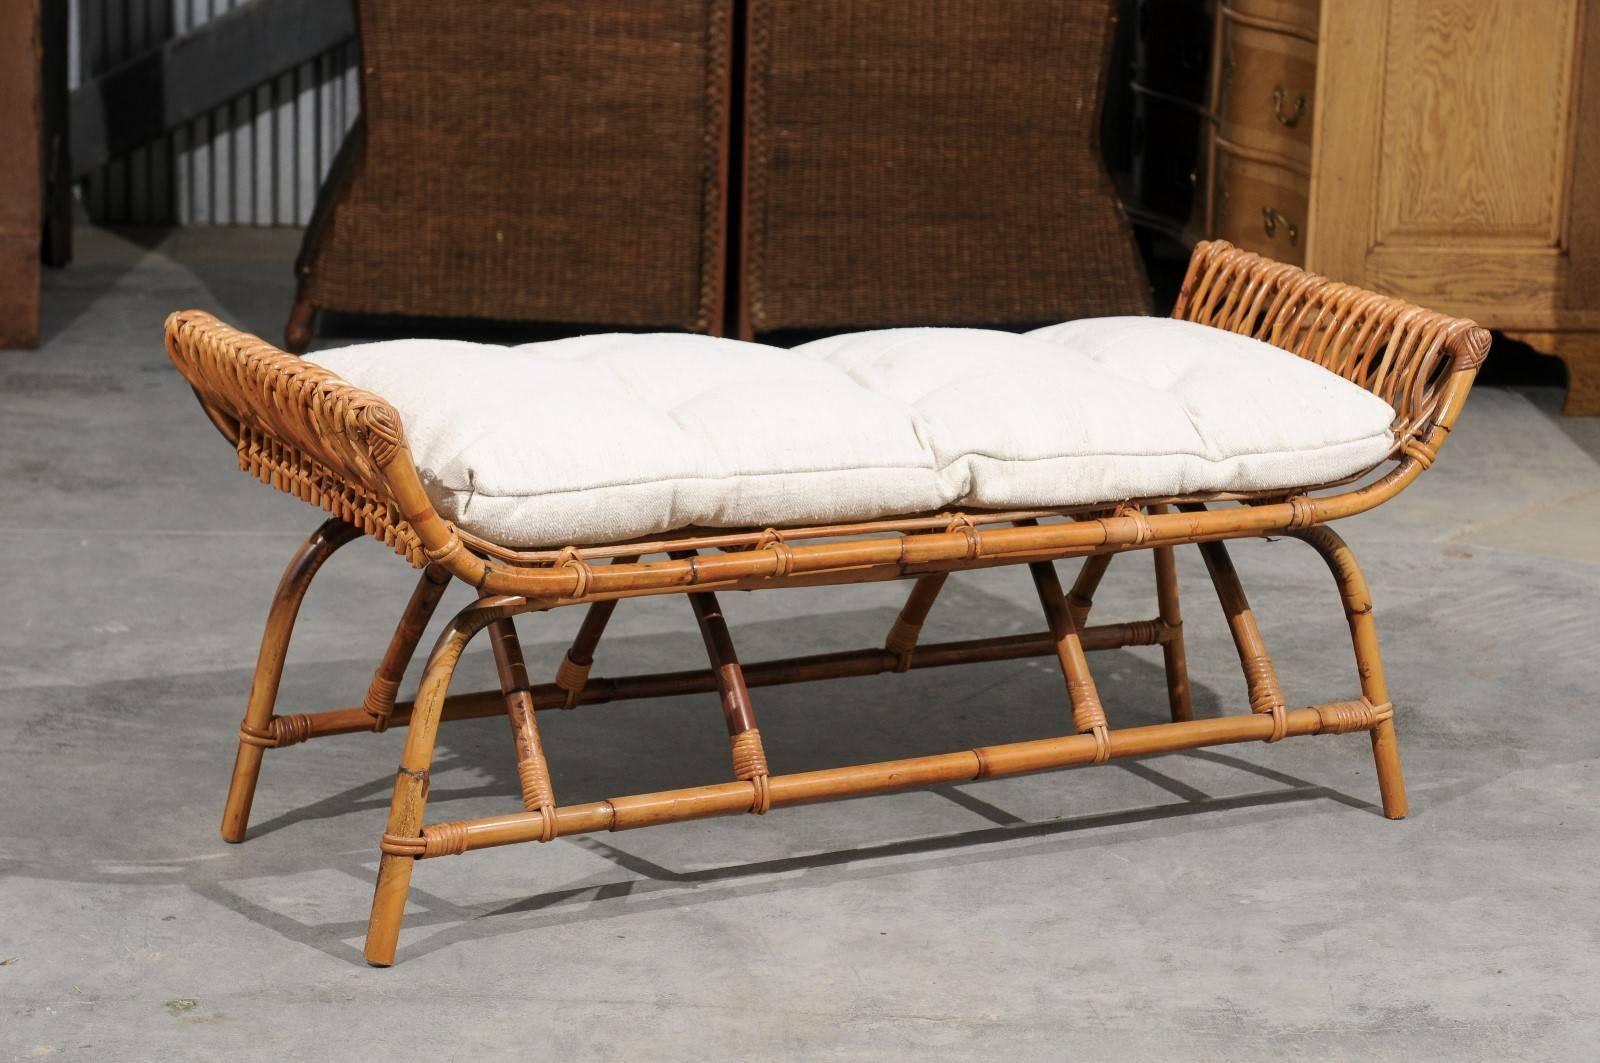 A French midcentury rattan low bench upholstered with Belgian linen cushion. This French rattan bench from the mid-20th century features a rattan structure made of simple curves. The rectangular seat is flanked by two curving arms. A new custom-made